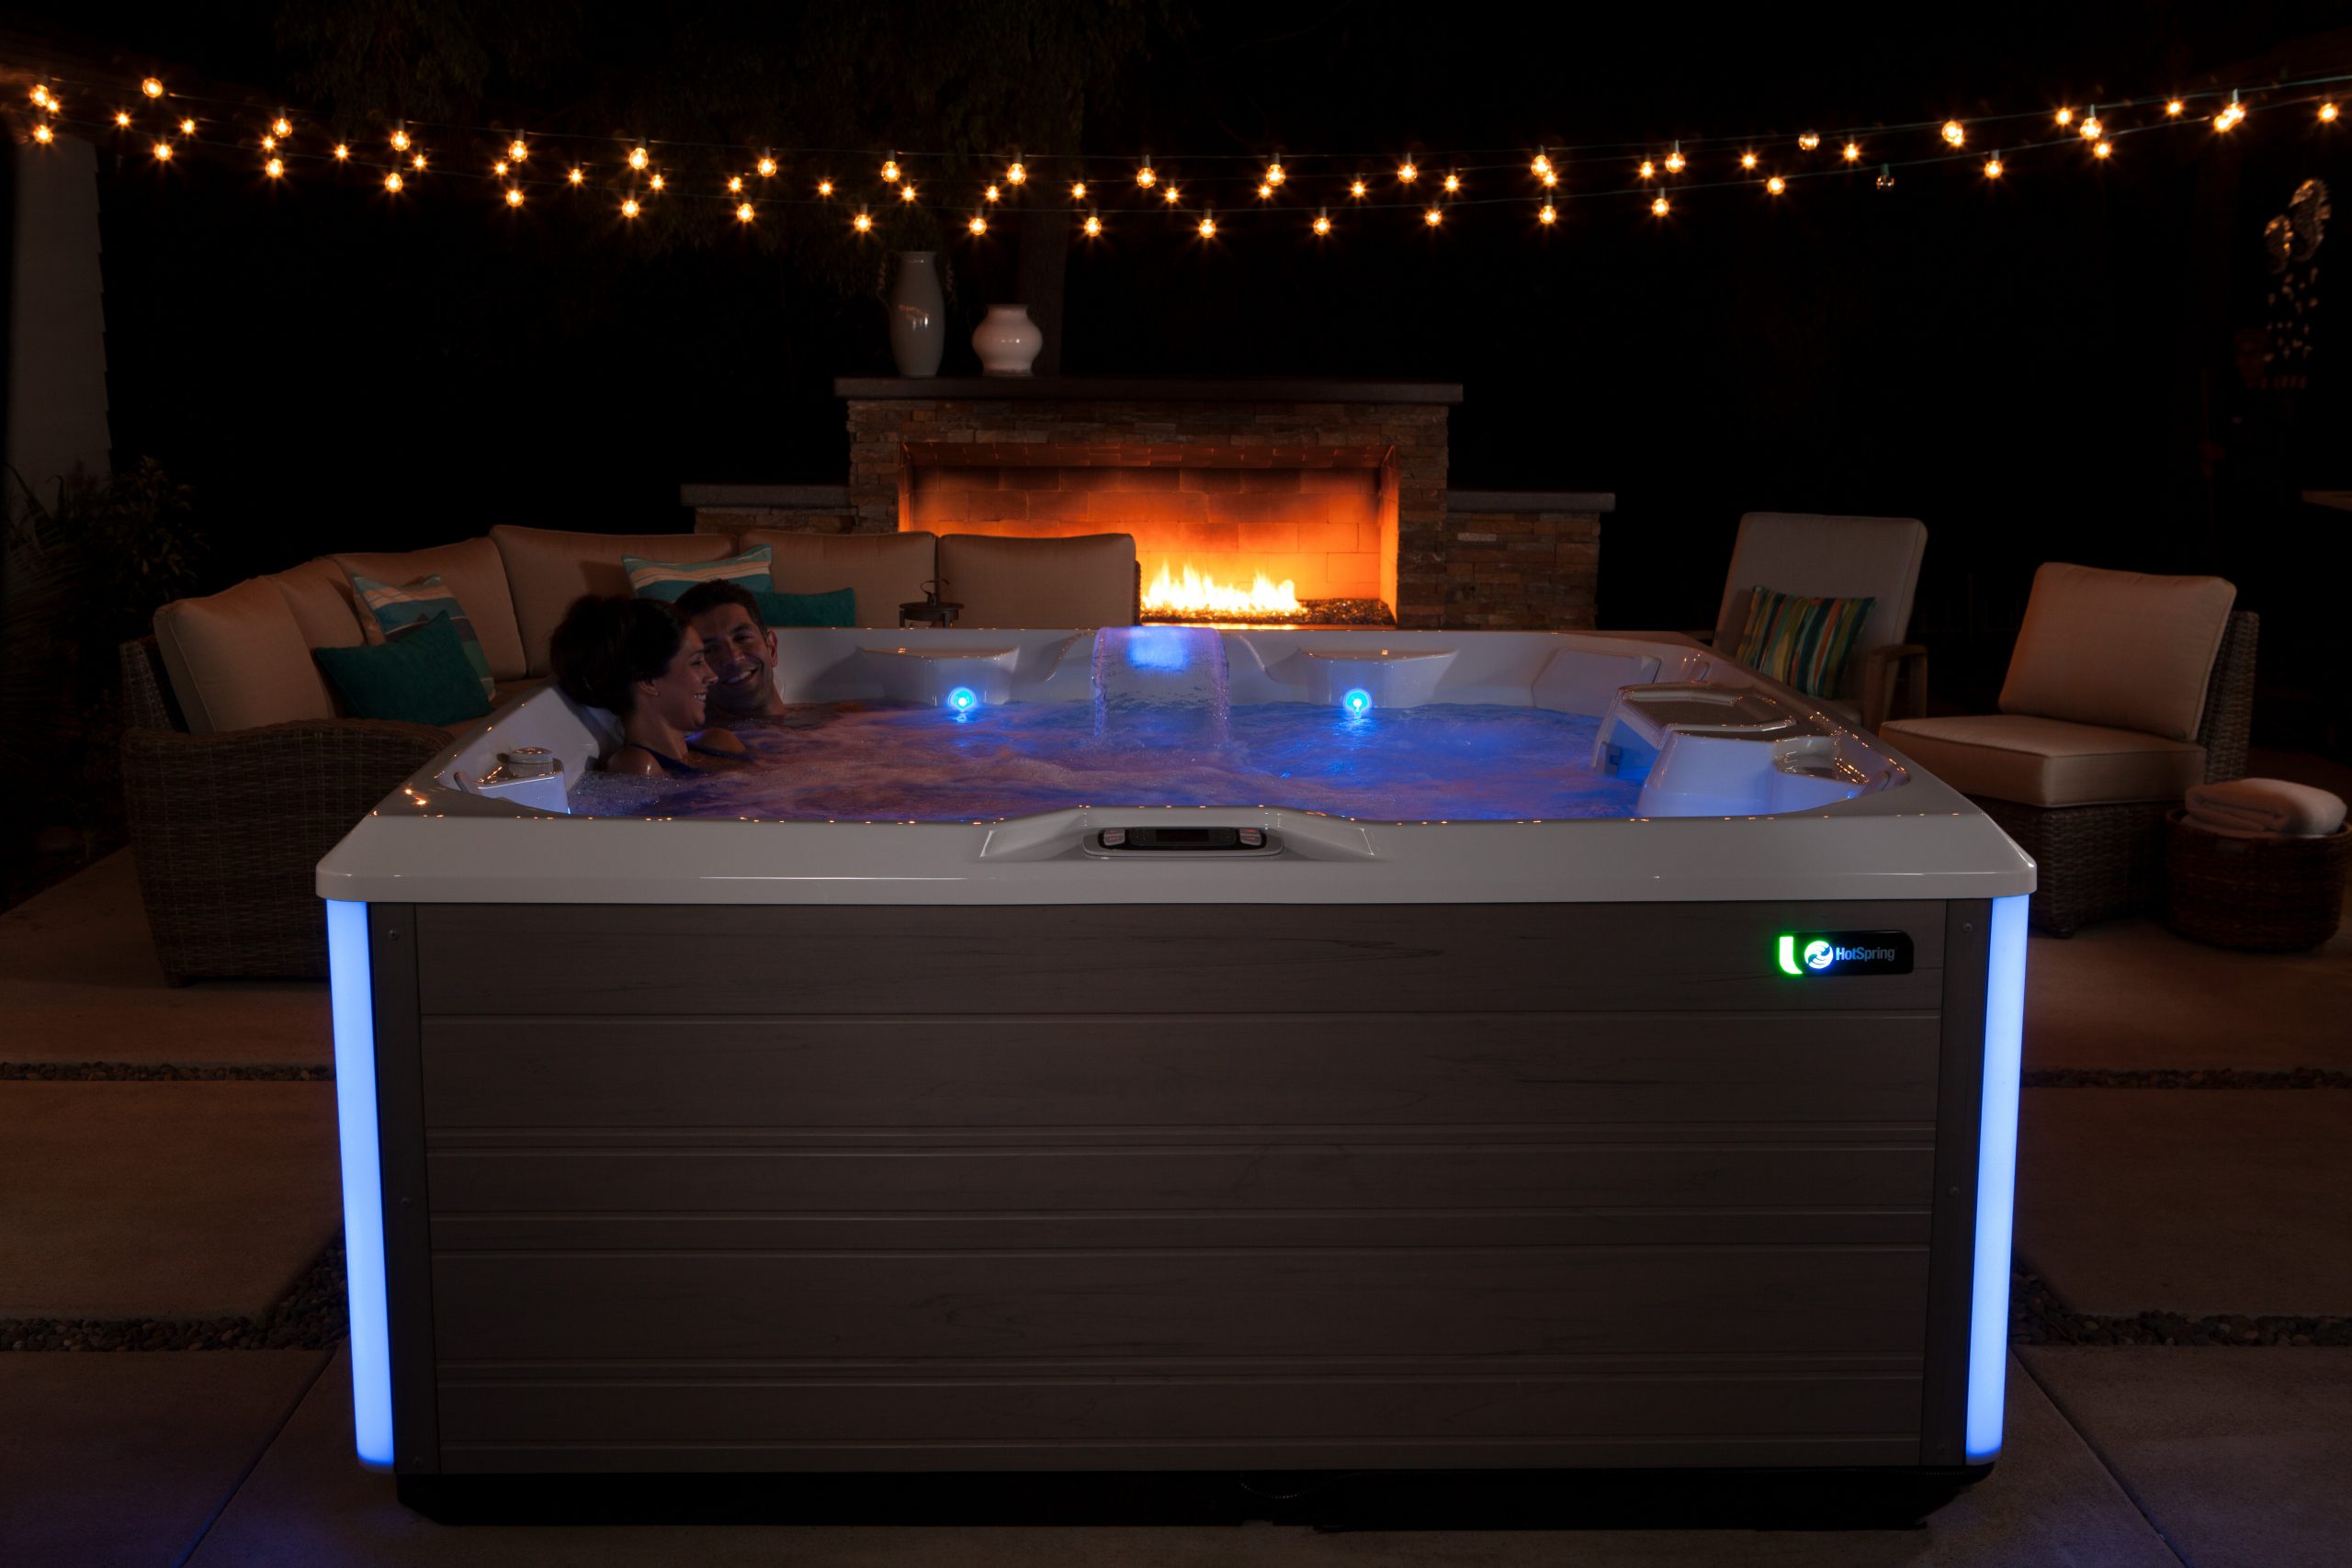 How COVID has Affected the Hot Tub Industry and Why it’s Worth the Wait!